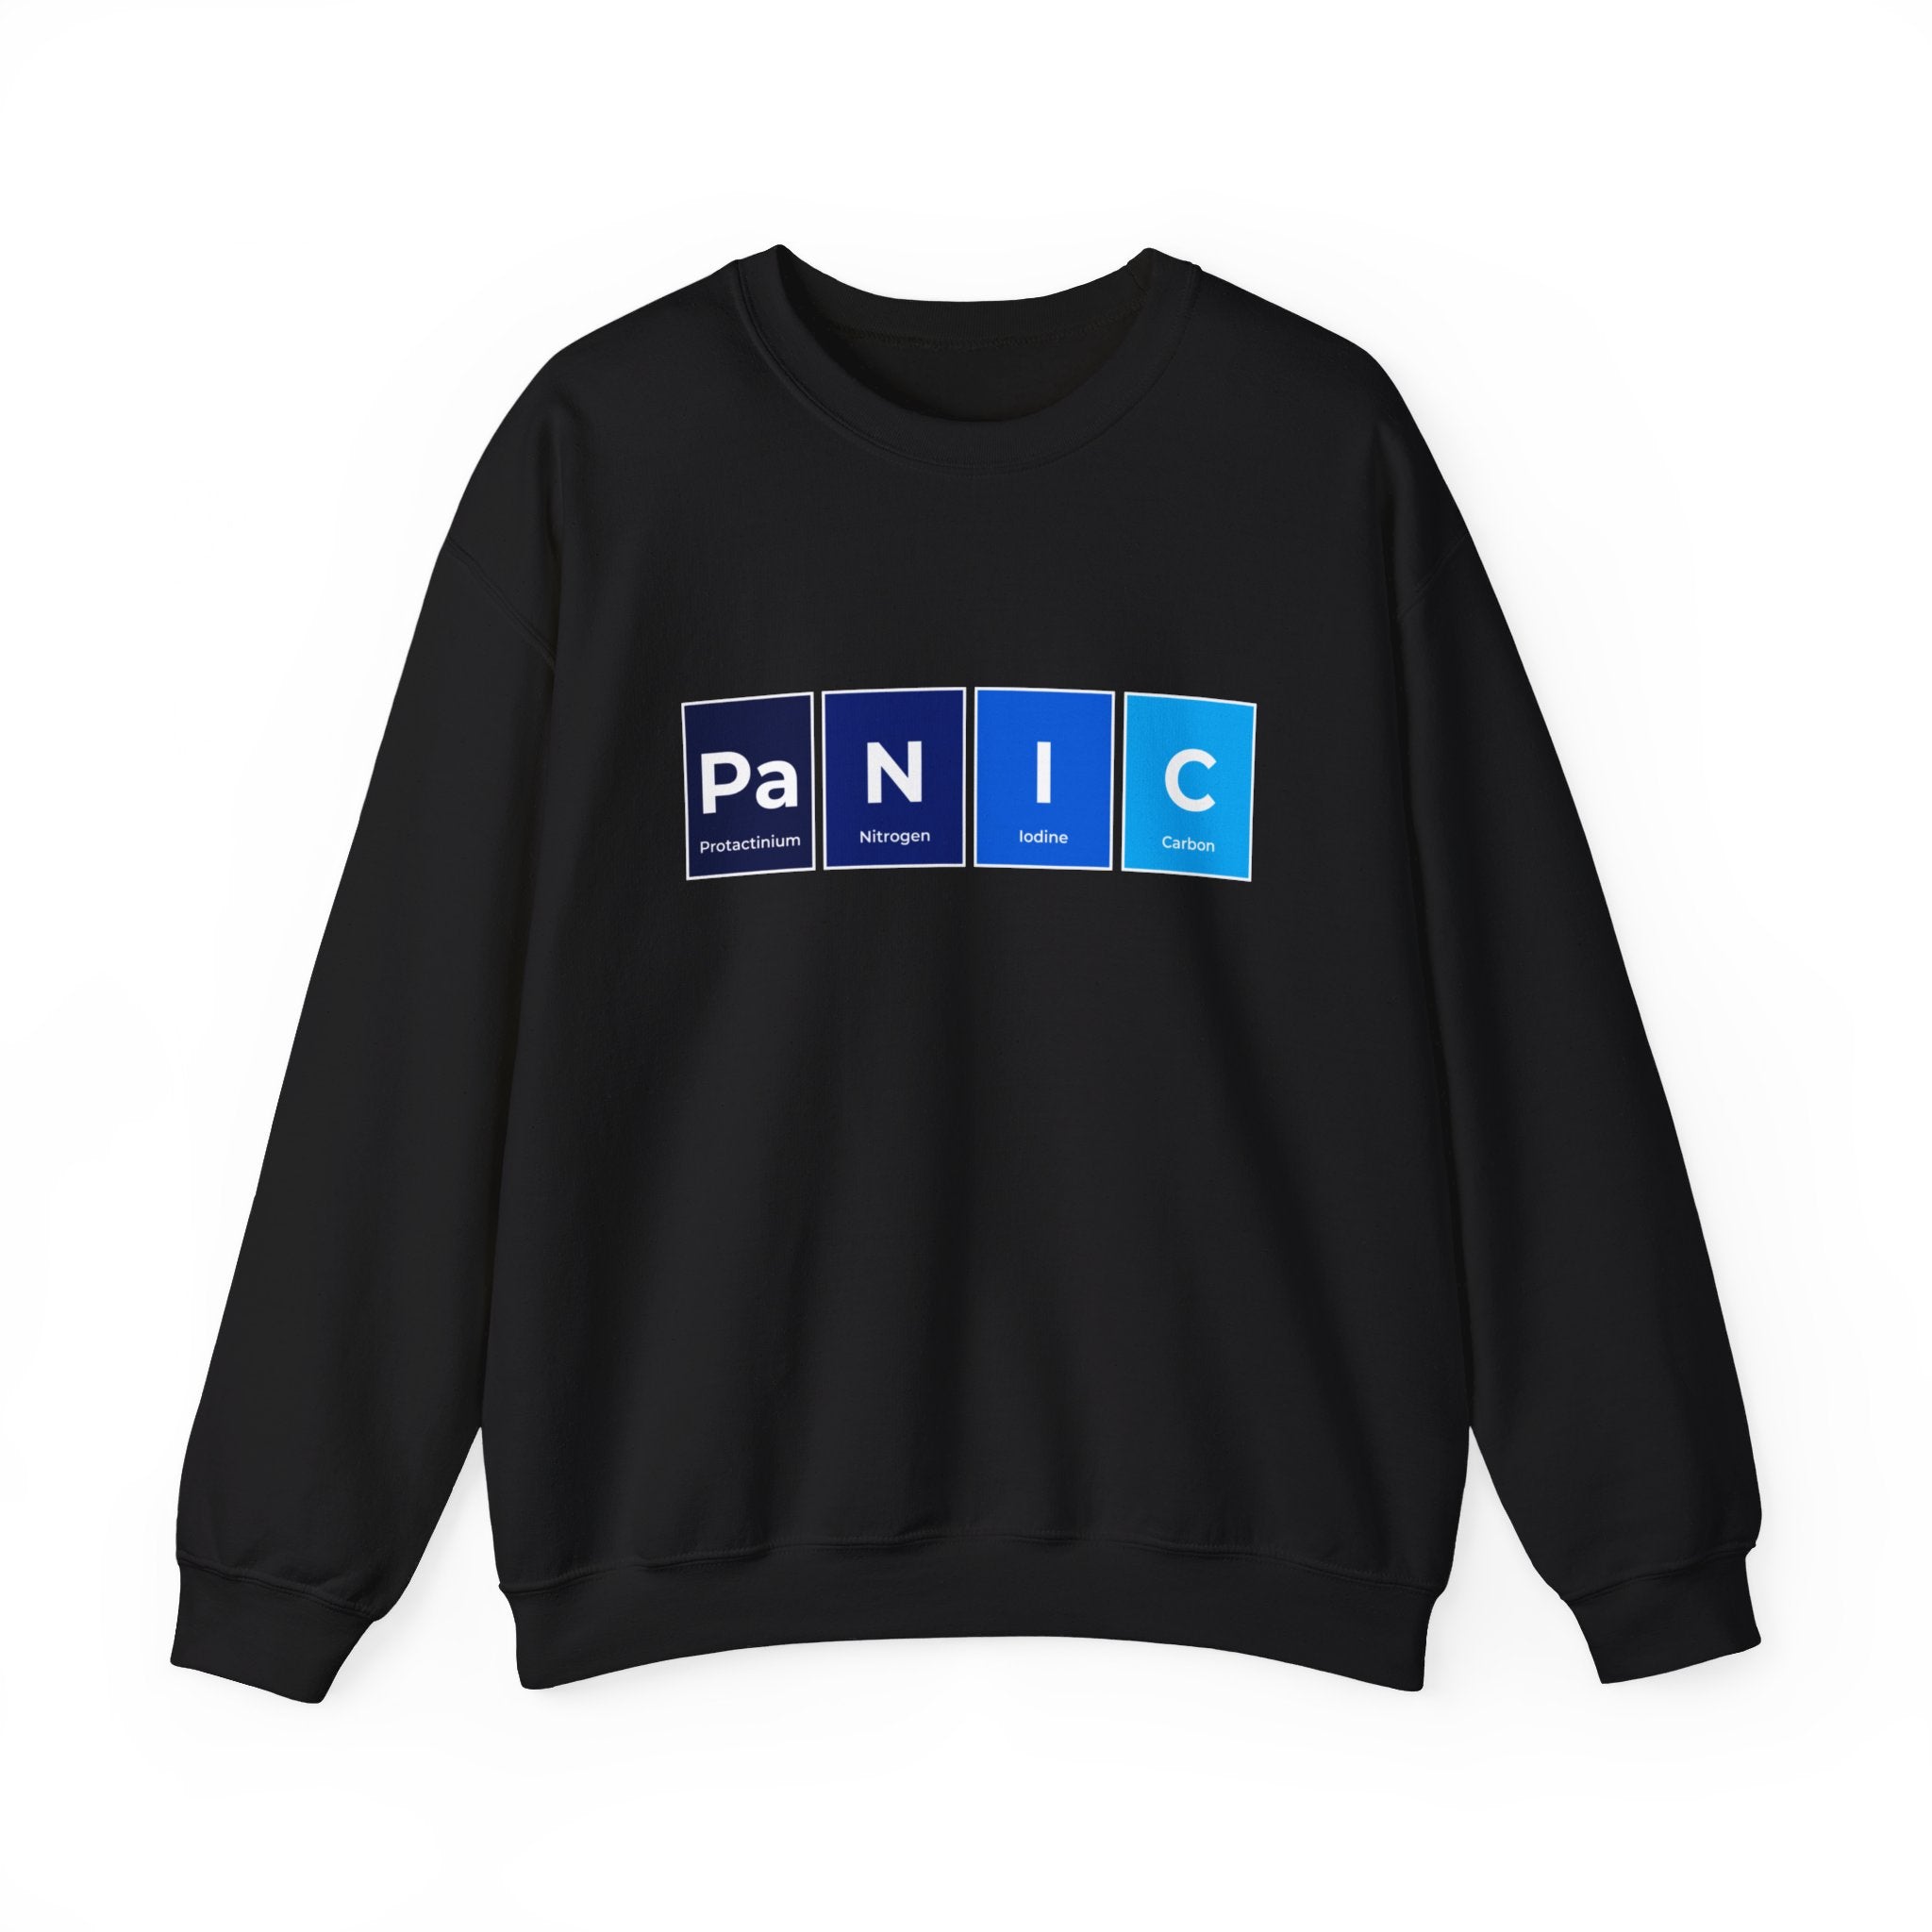 A black **Pa-N-I-C - Sweatshirt** perfect for colder months, featuring the cozy Pa-N-I-C design on the front in blue periodic table-style squares with chemical symbols for Protactinium, Nitrogen, Iodine, and Carbon.